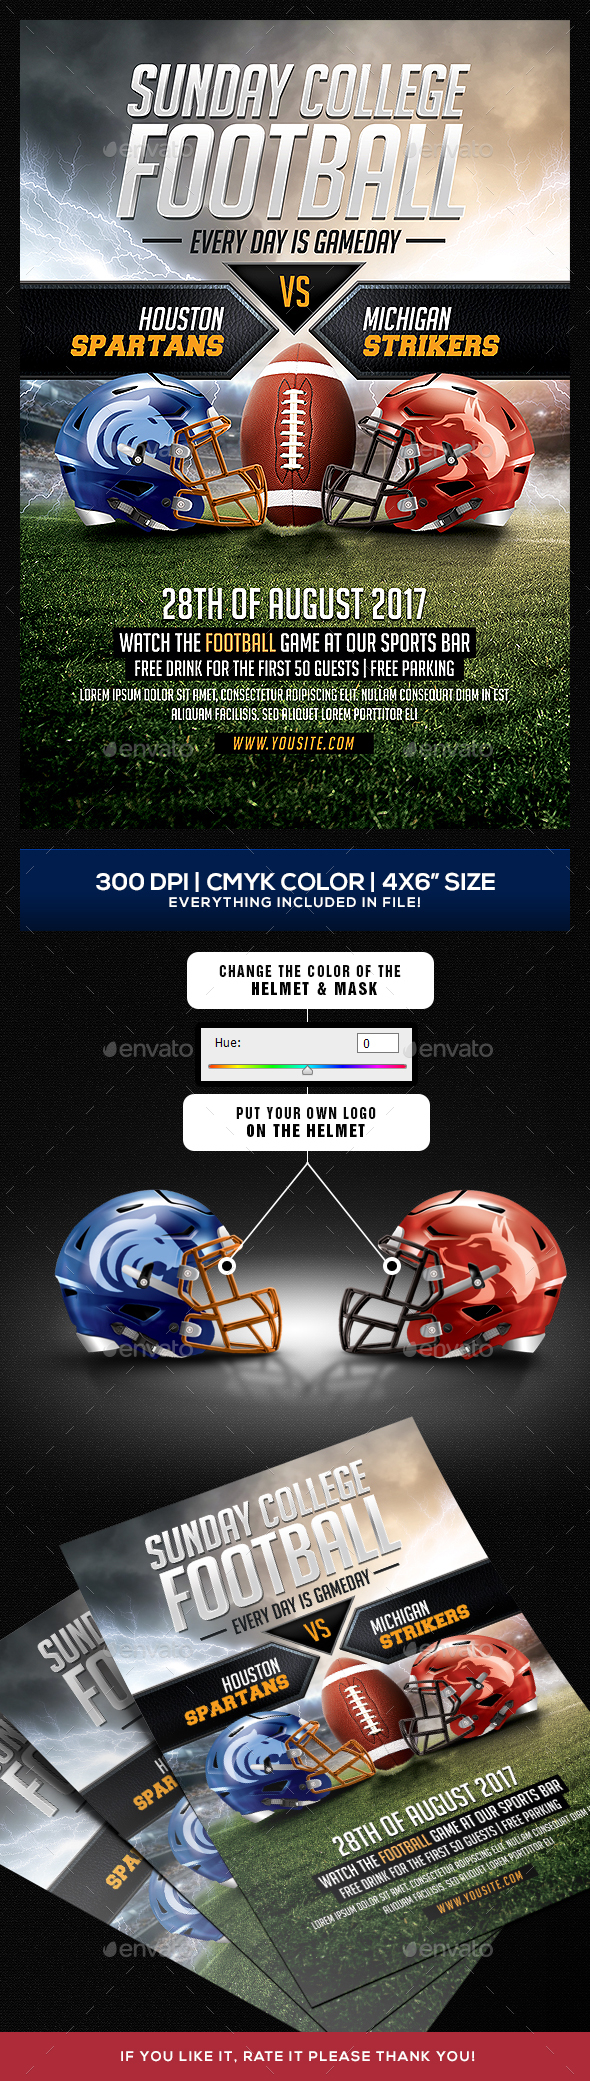 GraphicRiver Sunday College Football Flyer 20522559